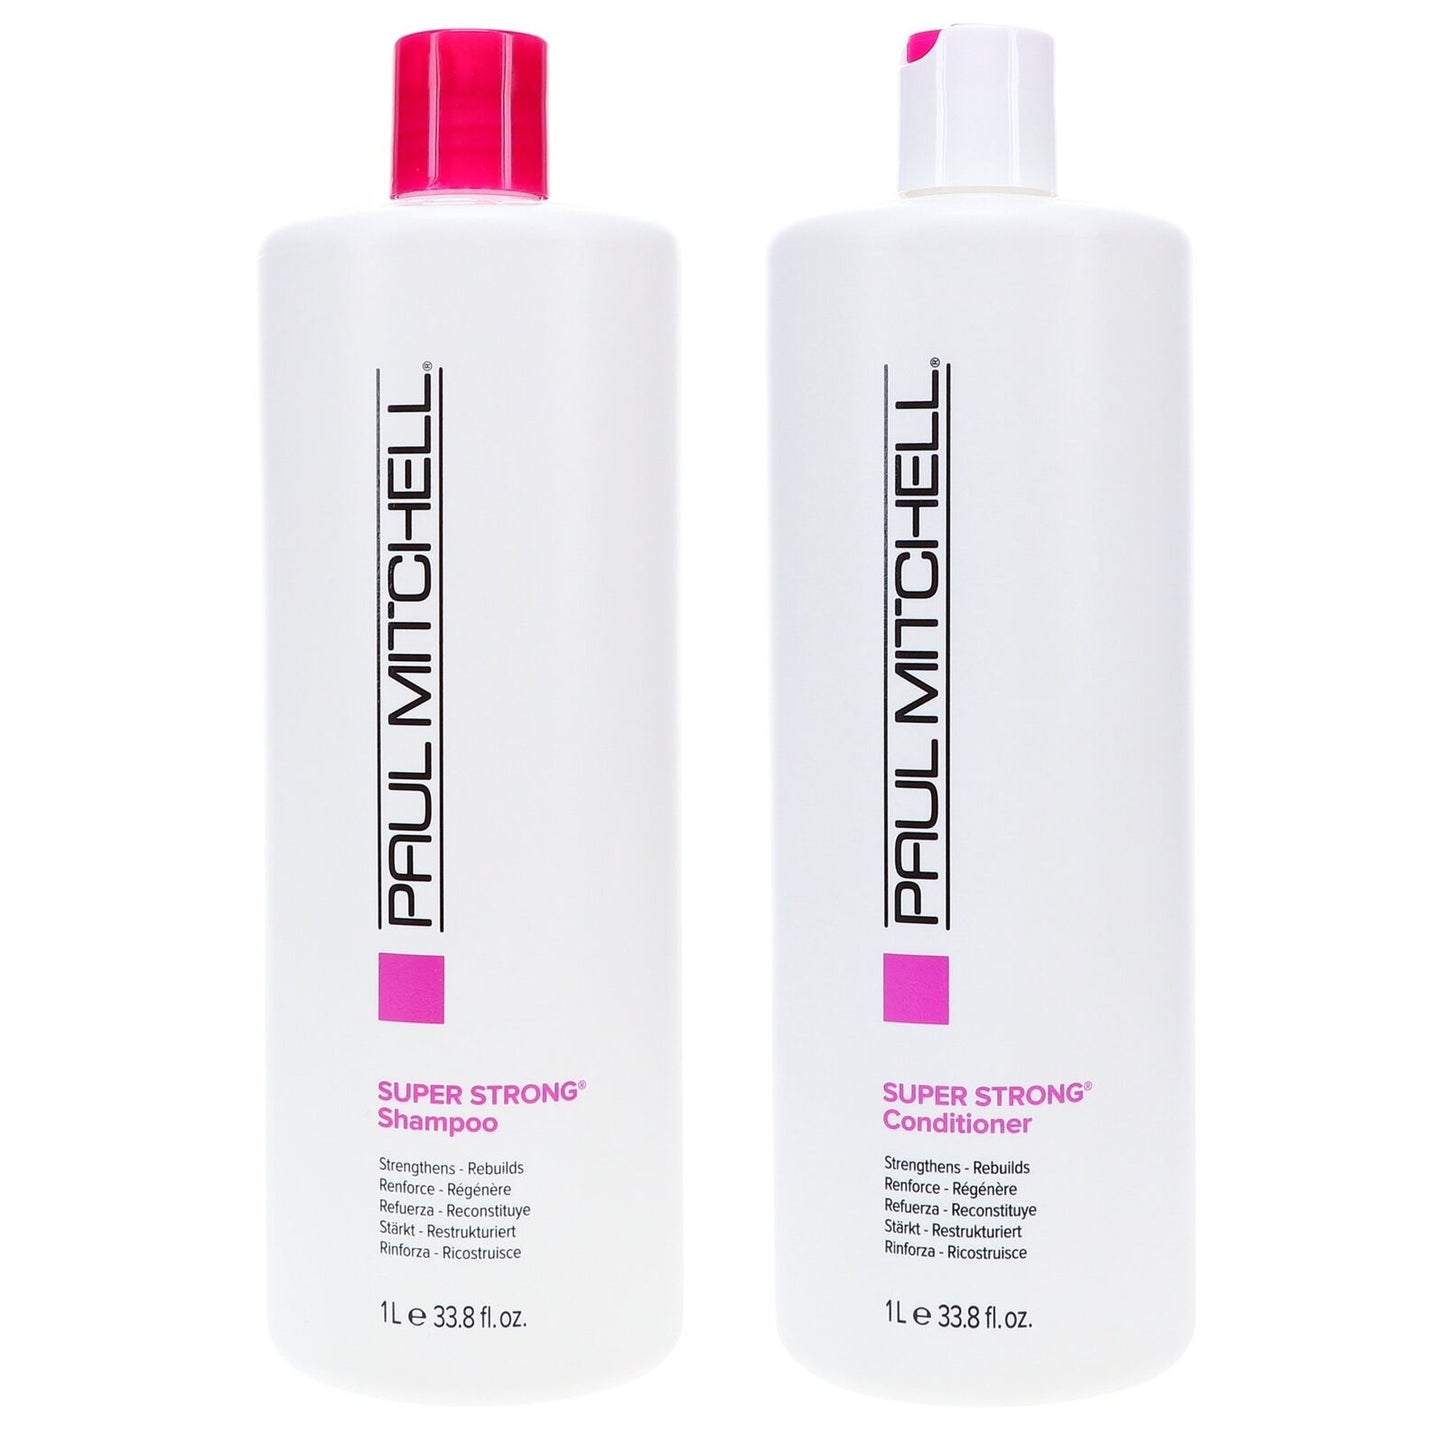 Paul Mitchell Super Strong Shampoo & Conditioner DUO